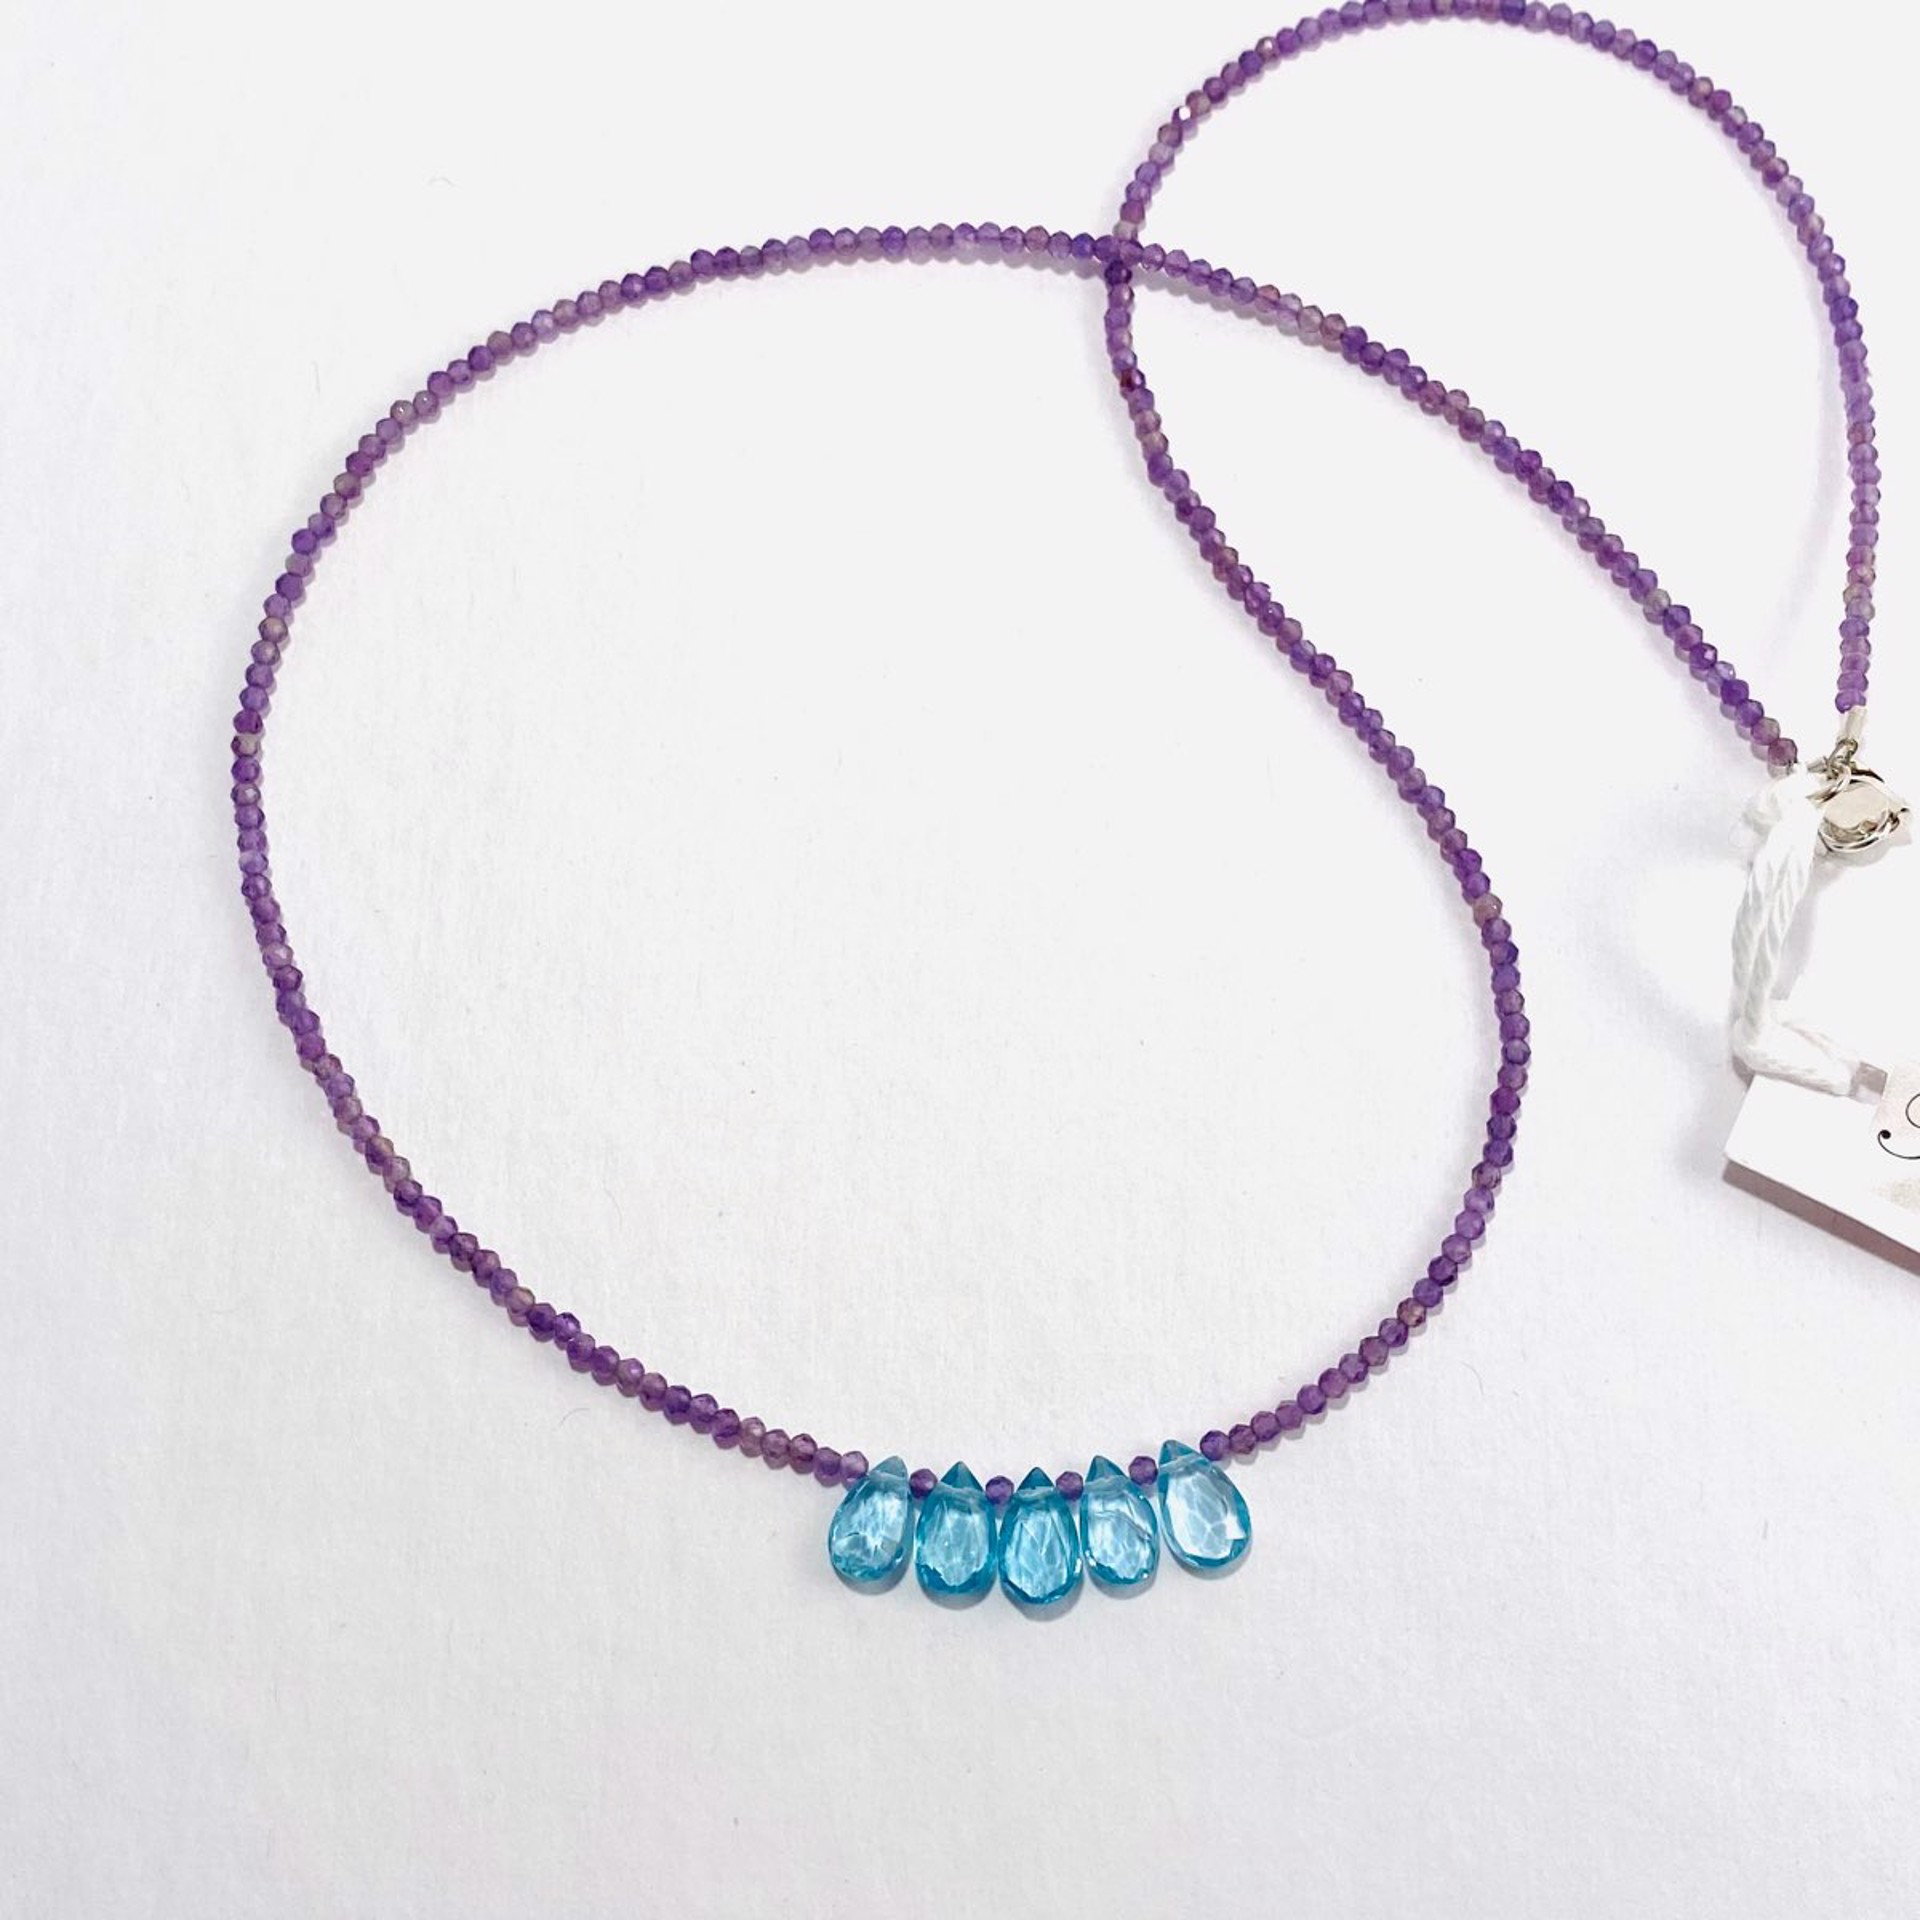 NT22-214 Tiny Faceted Amethyst Five Blue Apatite Brio Necklace by Nance Trueworthy